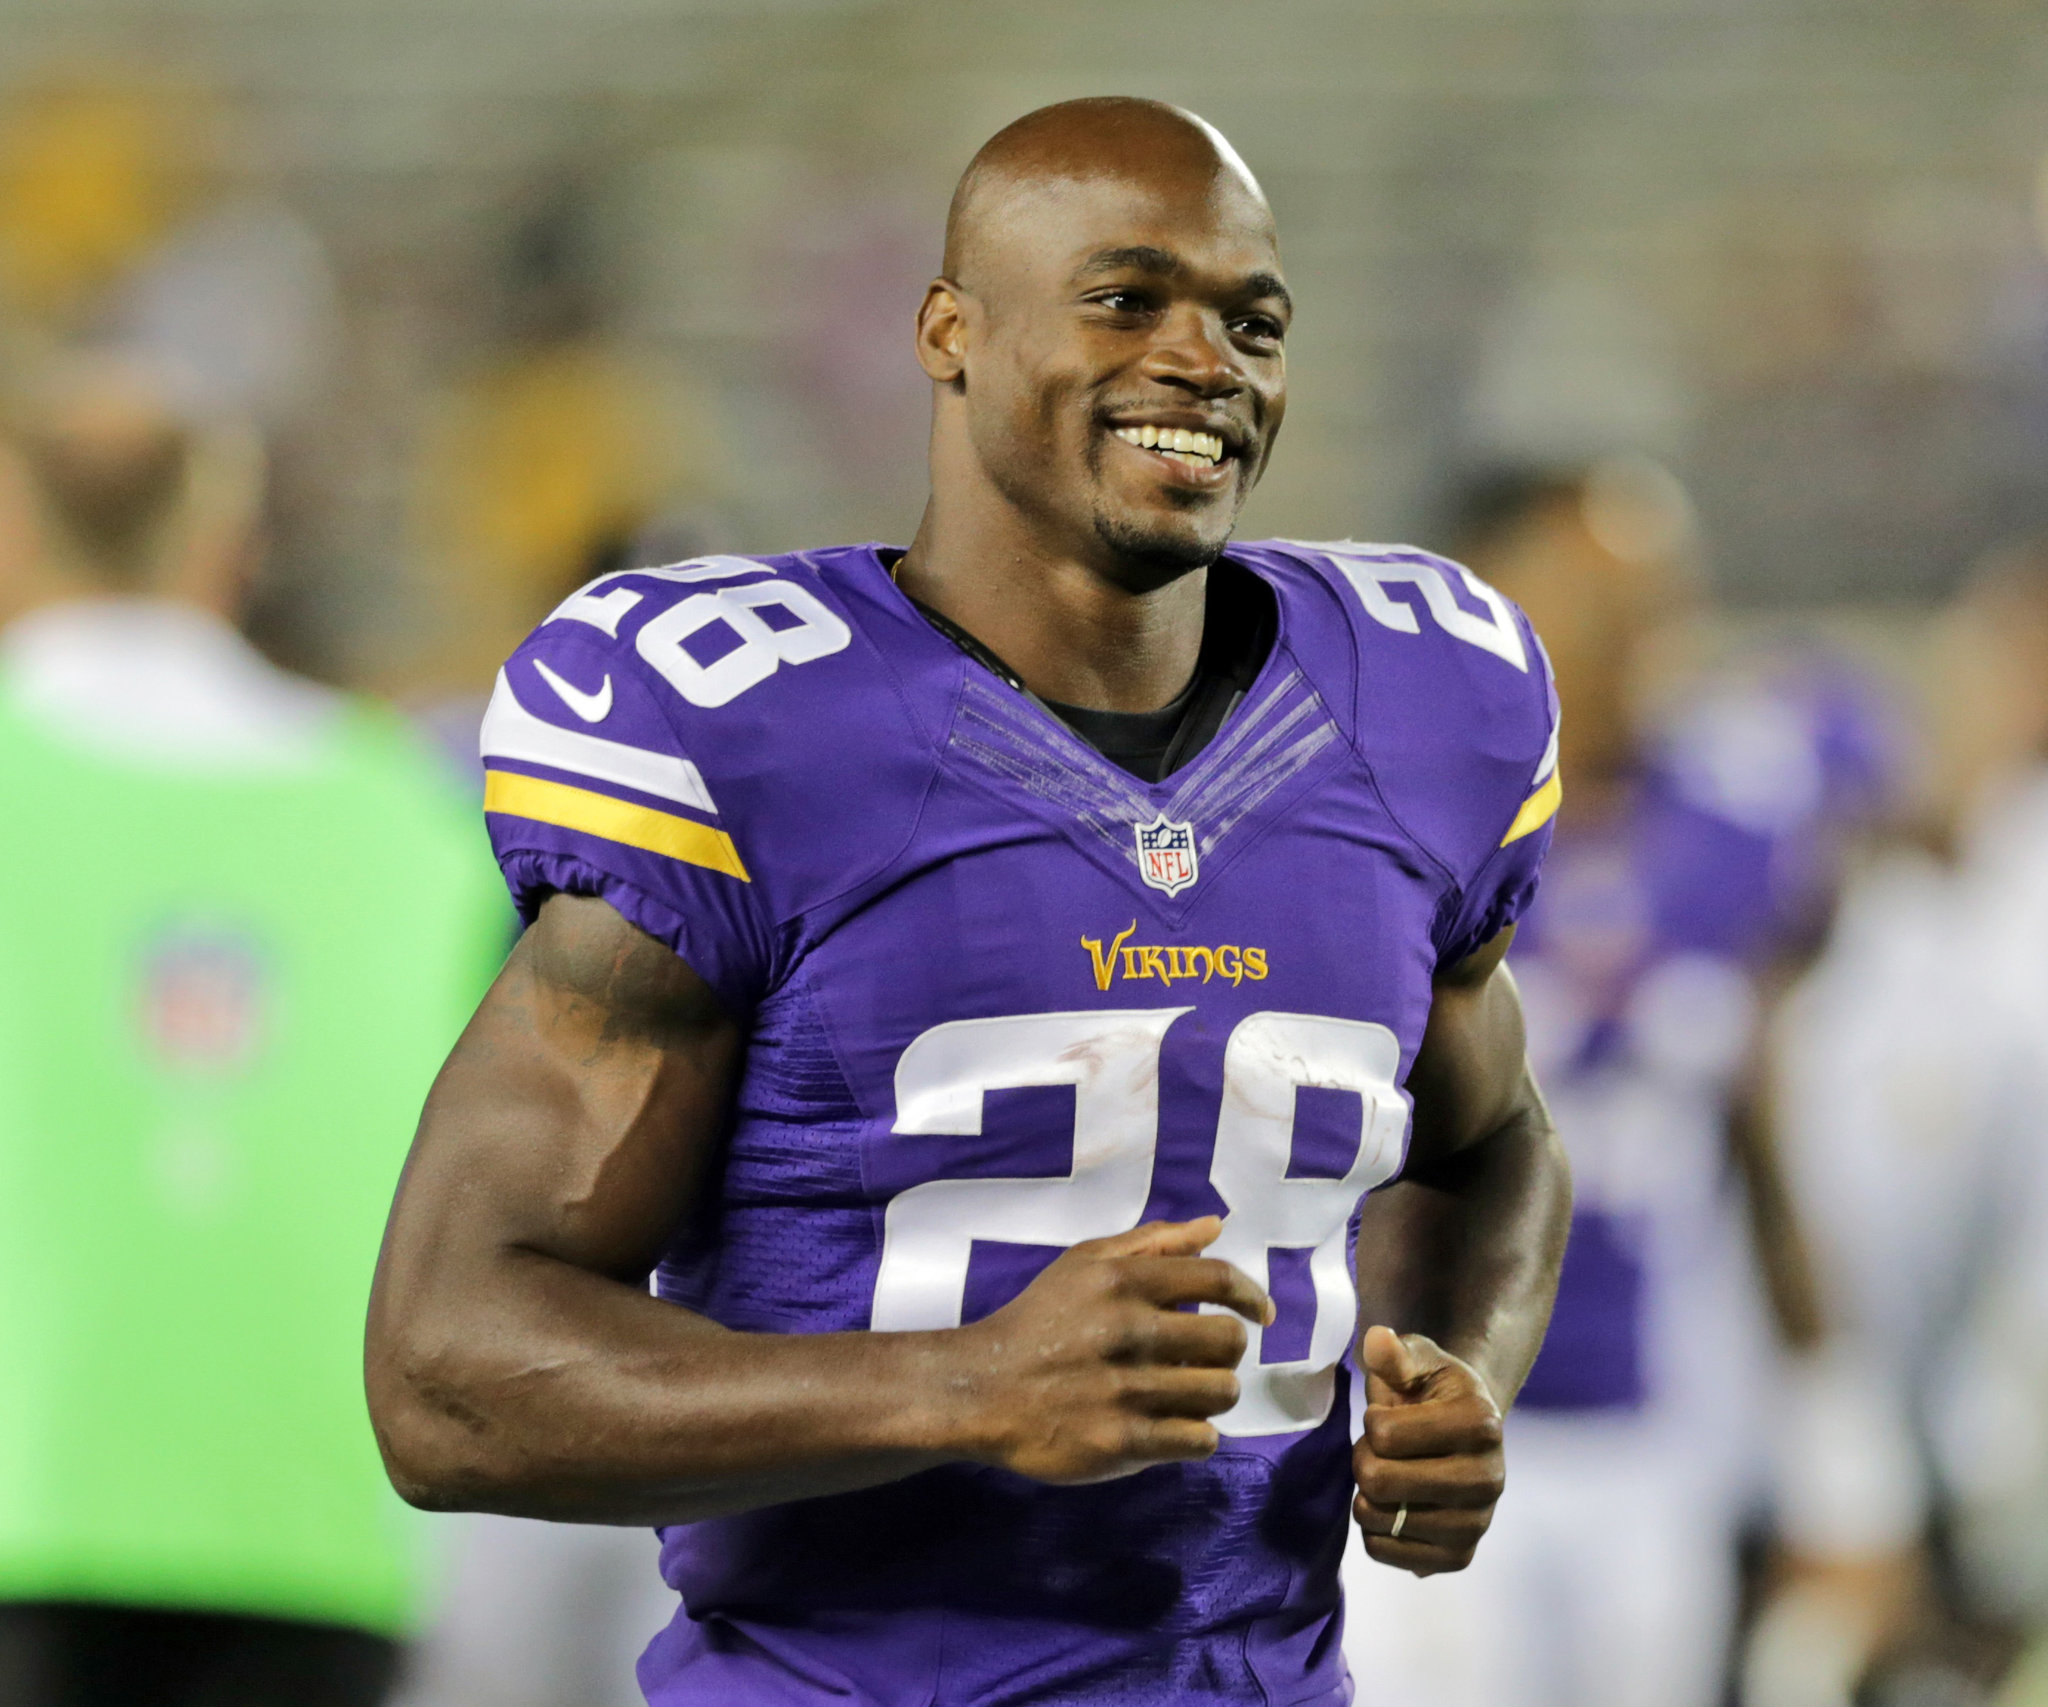 Adrian Peterson Net Worth 2022: How much does Adrian Peterson Make a Year?